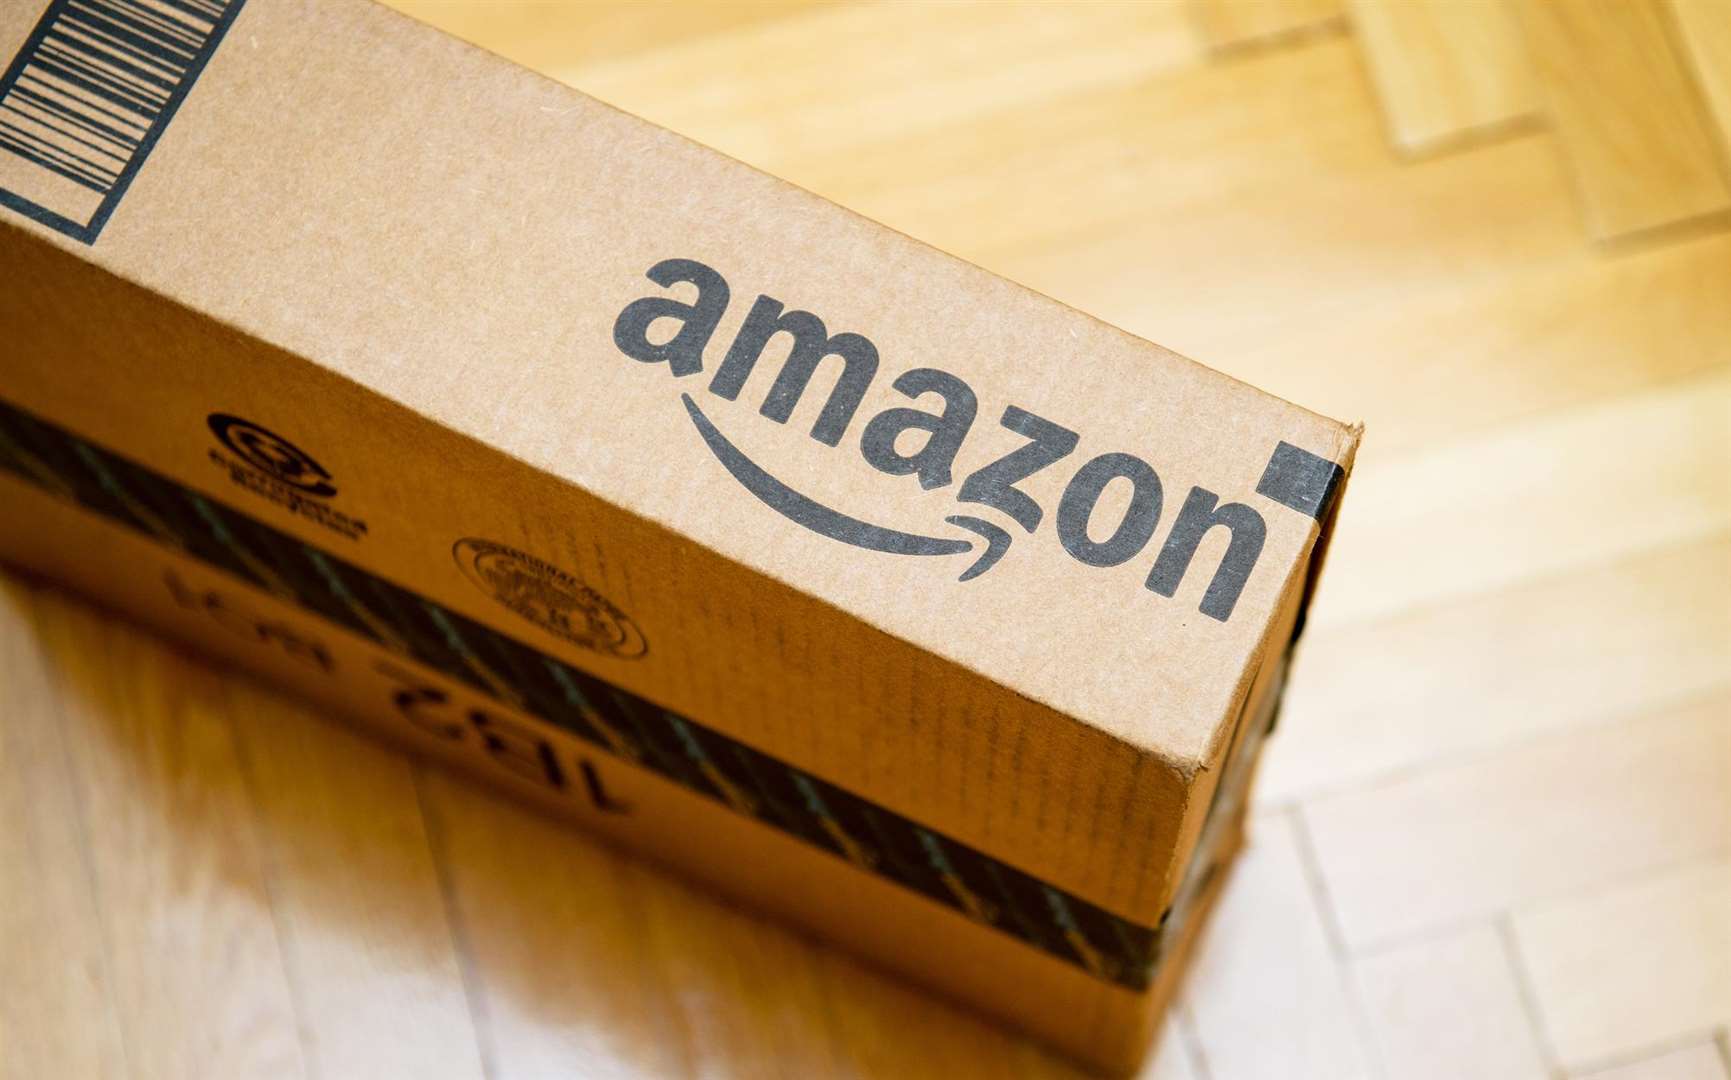 Amazon Prime arrives for Aussie customers